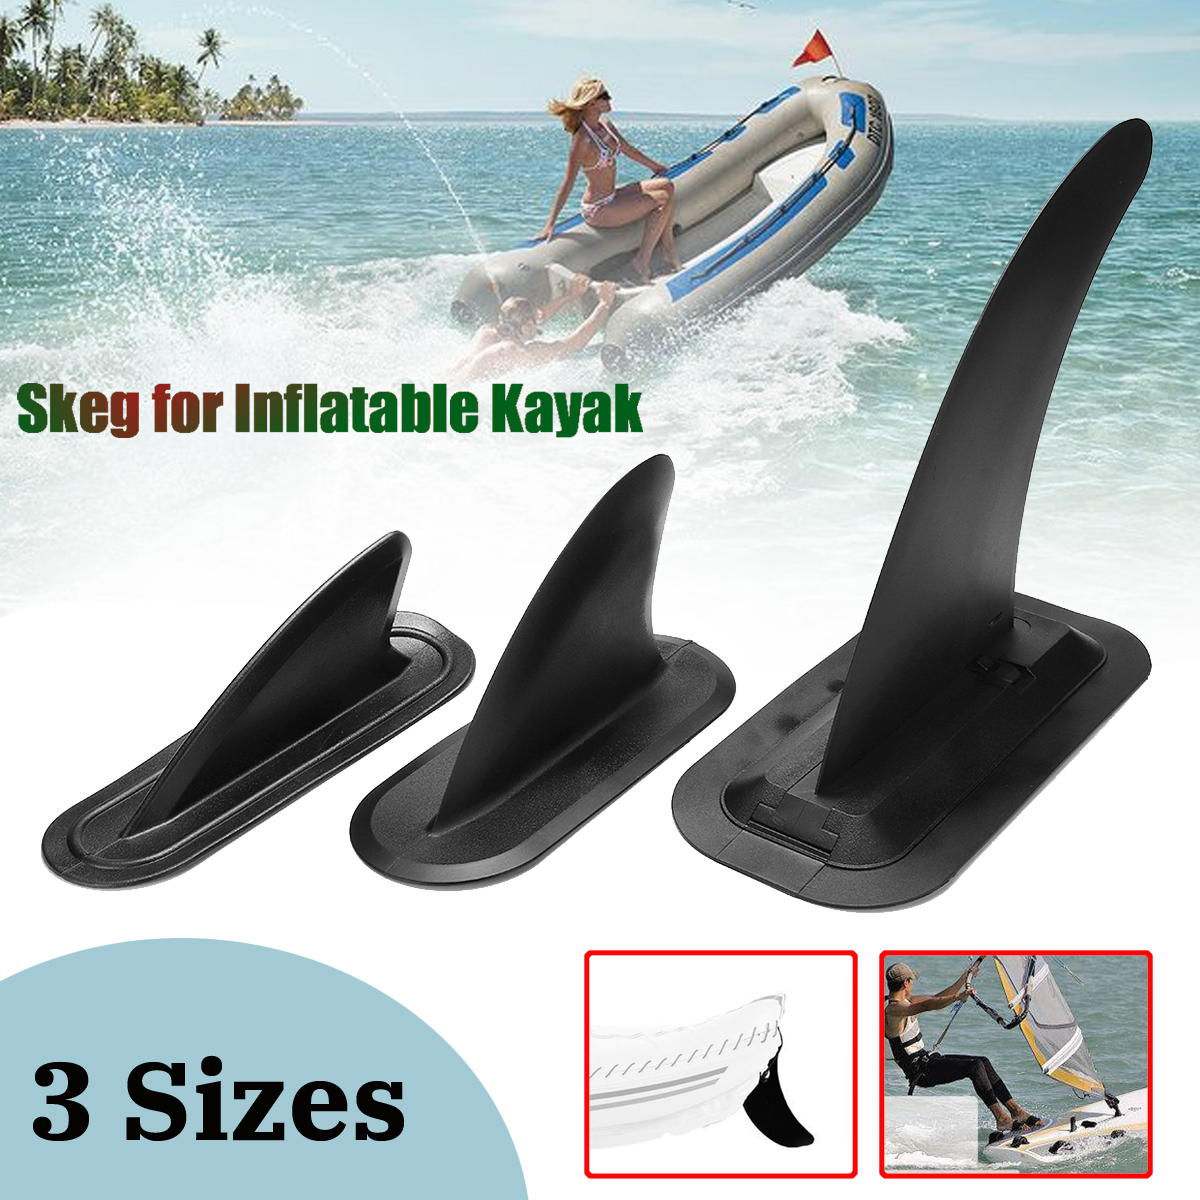 Details about   MagiDeal Longboard Surfboard Fin Single Kayak Tracking Skeg Mounting Point 